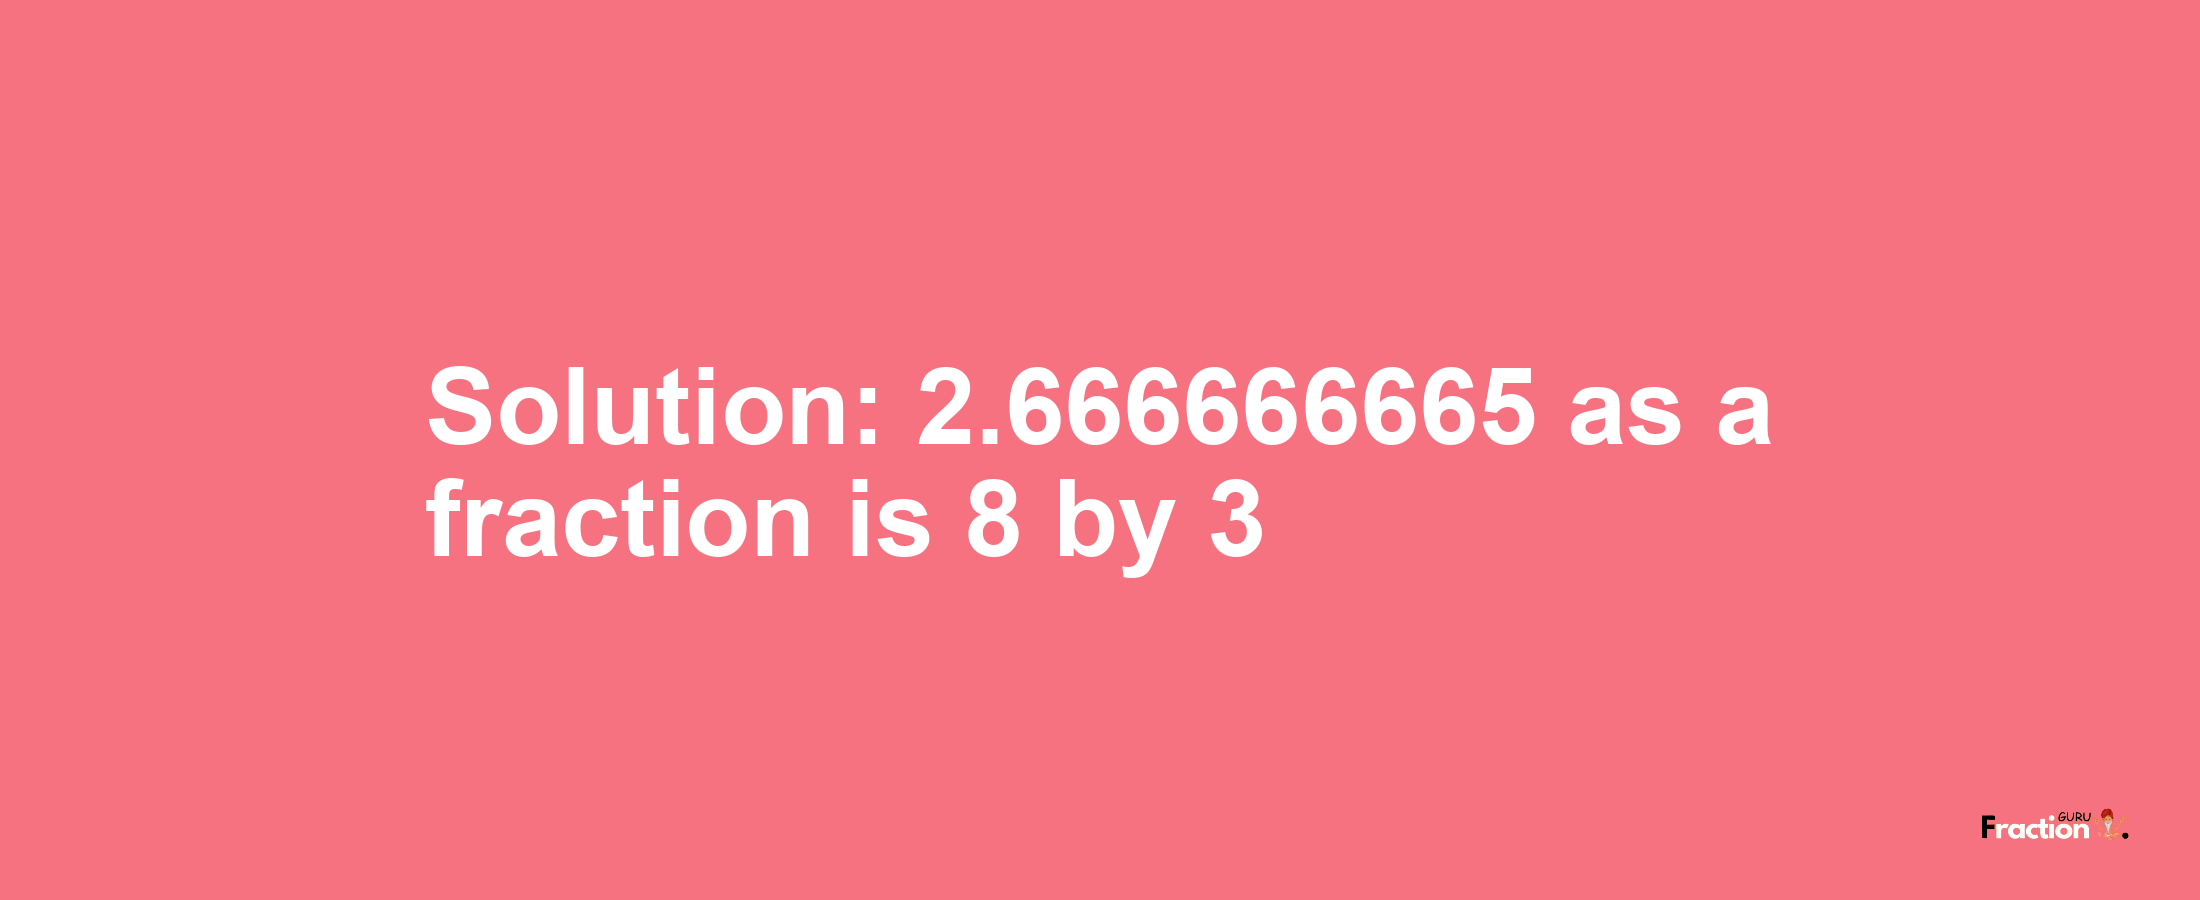 Solution:2.666666665 as a fraction is 8/3